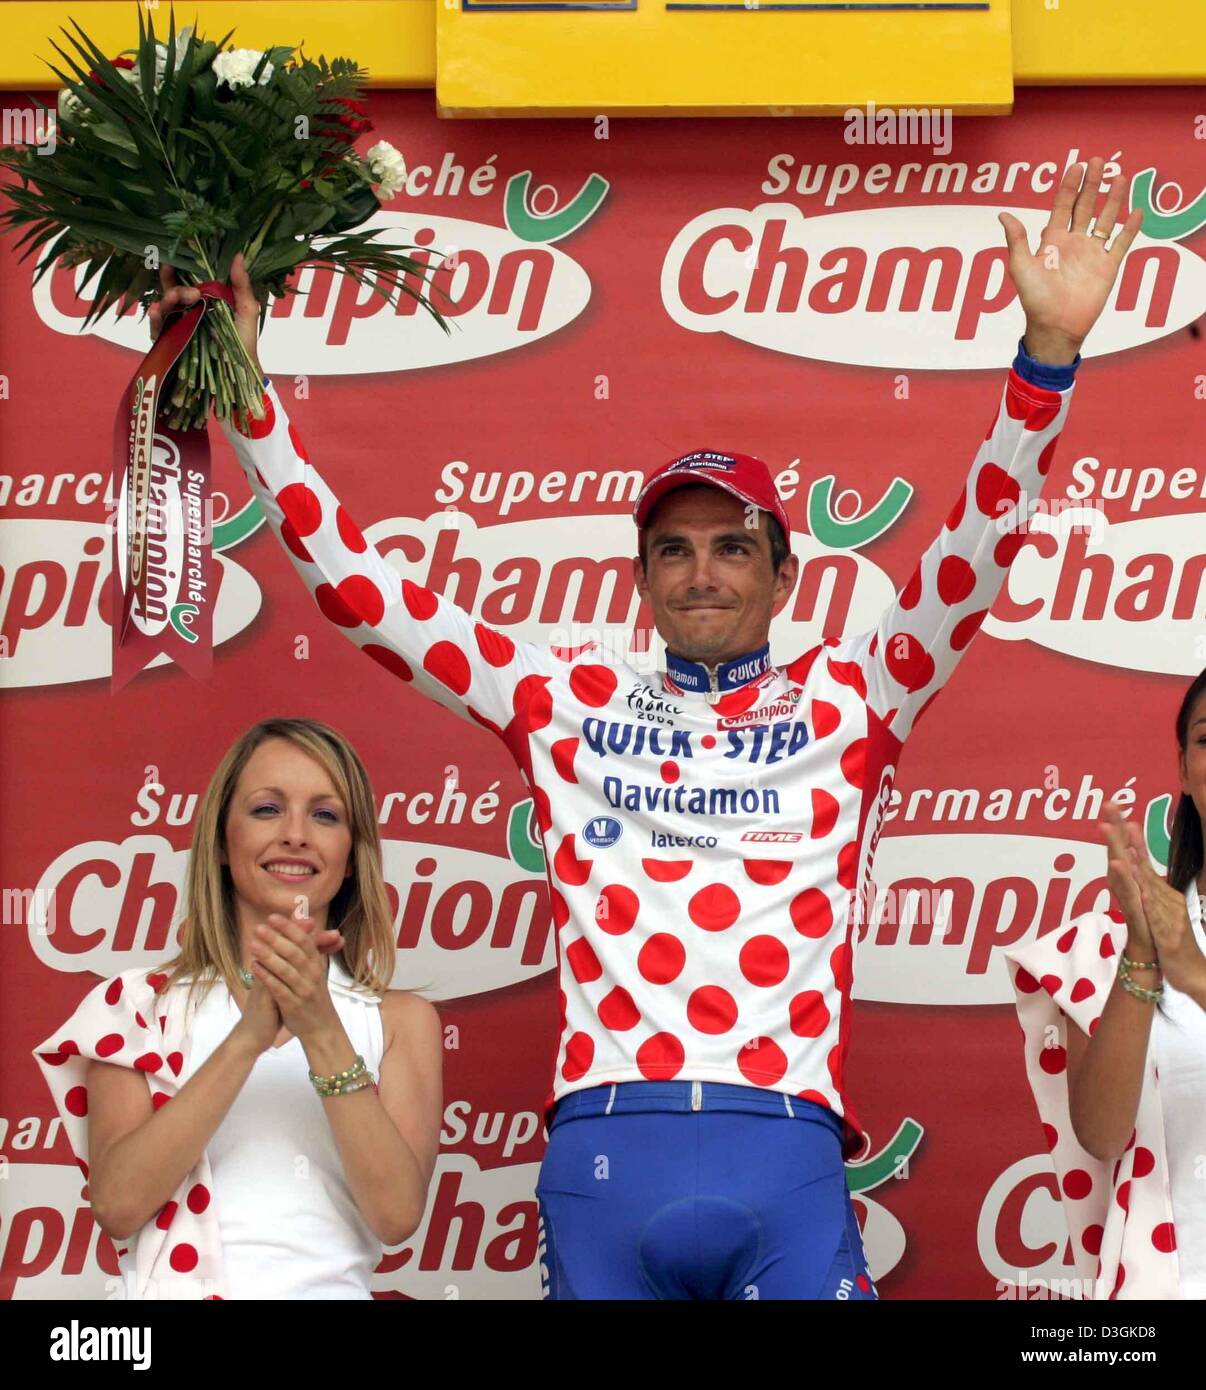 (dpa) - French cyclist Richard Virenque of team Quick Step-Davitamon celebrates after successfully defending the polka dotted jersey of the best climber in the 15th stage of the 91st Tour de France cycling race in Villard-de-Lans, France, 20 July 2004. Lance Armstrong won the 180.5 km long stage from Valreas to Villard-de-Lans after outsprinting his rivals and claim his second stag Stock Photo